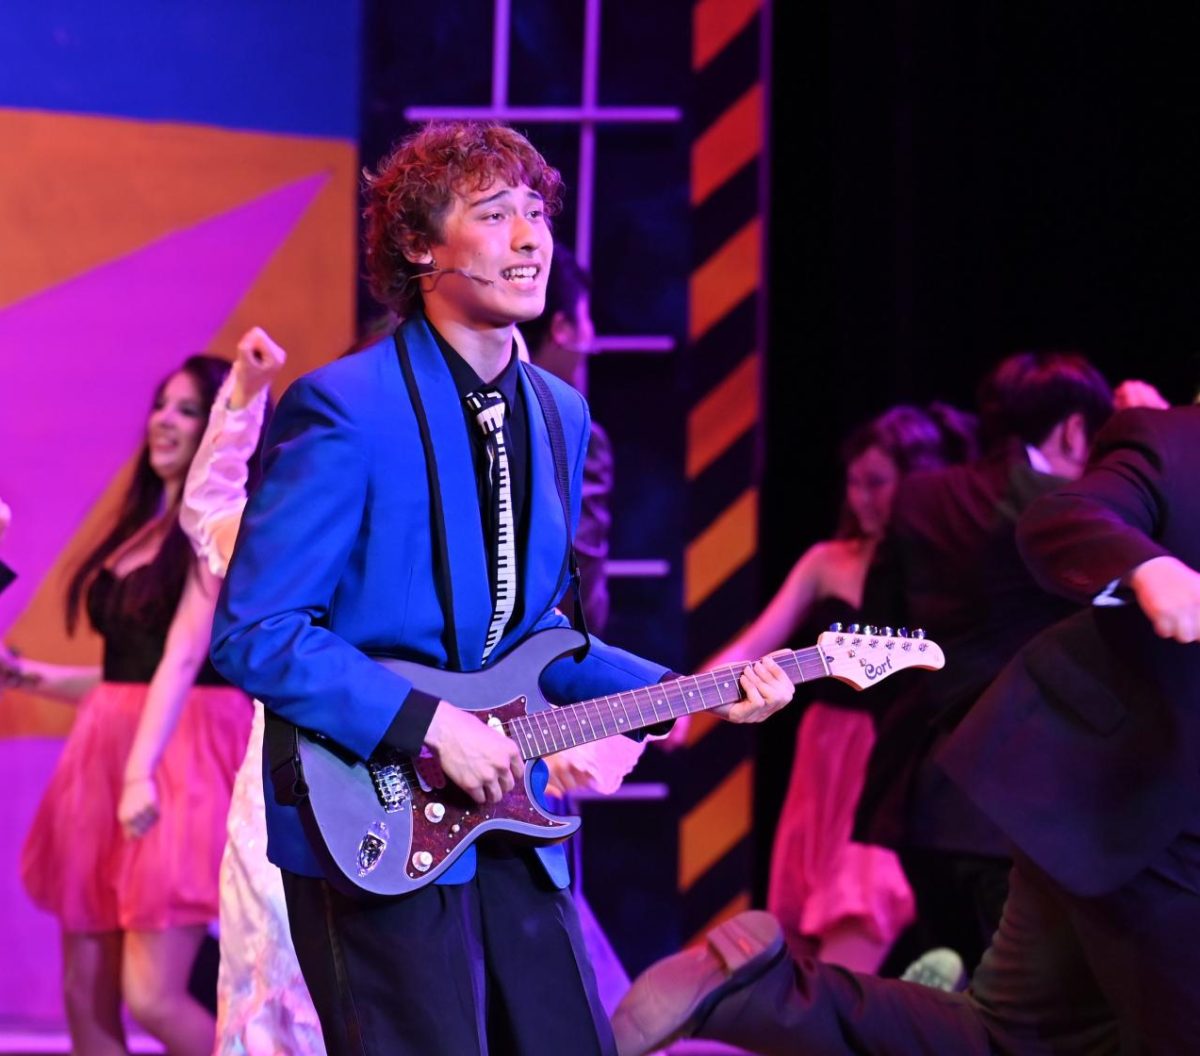 Ian Ogden (12)’s Robbie Hart plays the electric guitar while singing “When It’s Your Wedding Day.” “This musical is very lead-heavy,” Ian said. “It took me a while to get to know my character and all his mannerisms.